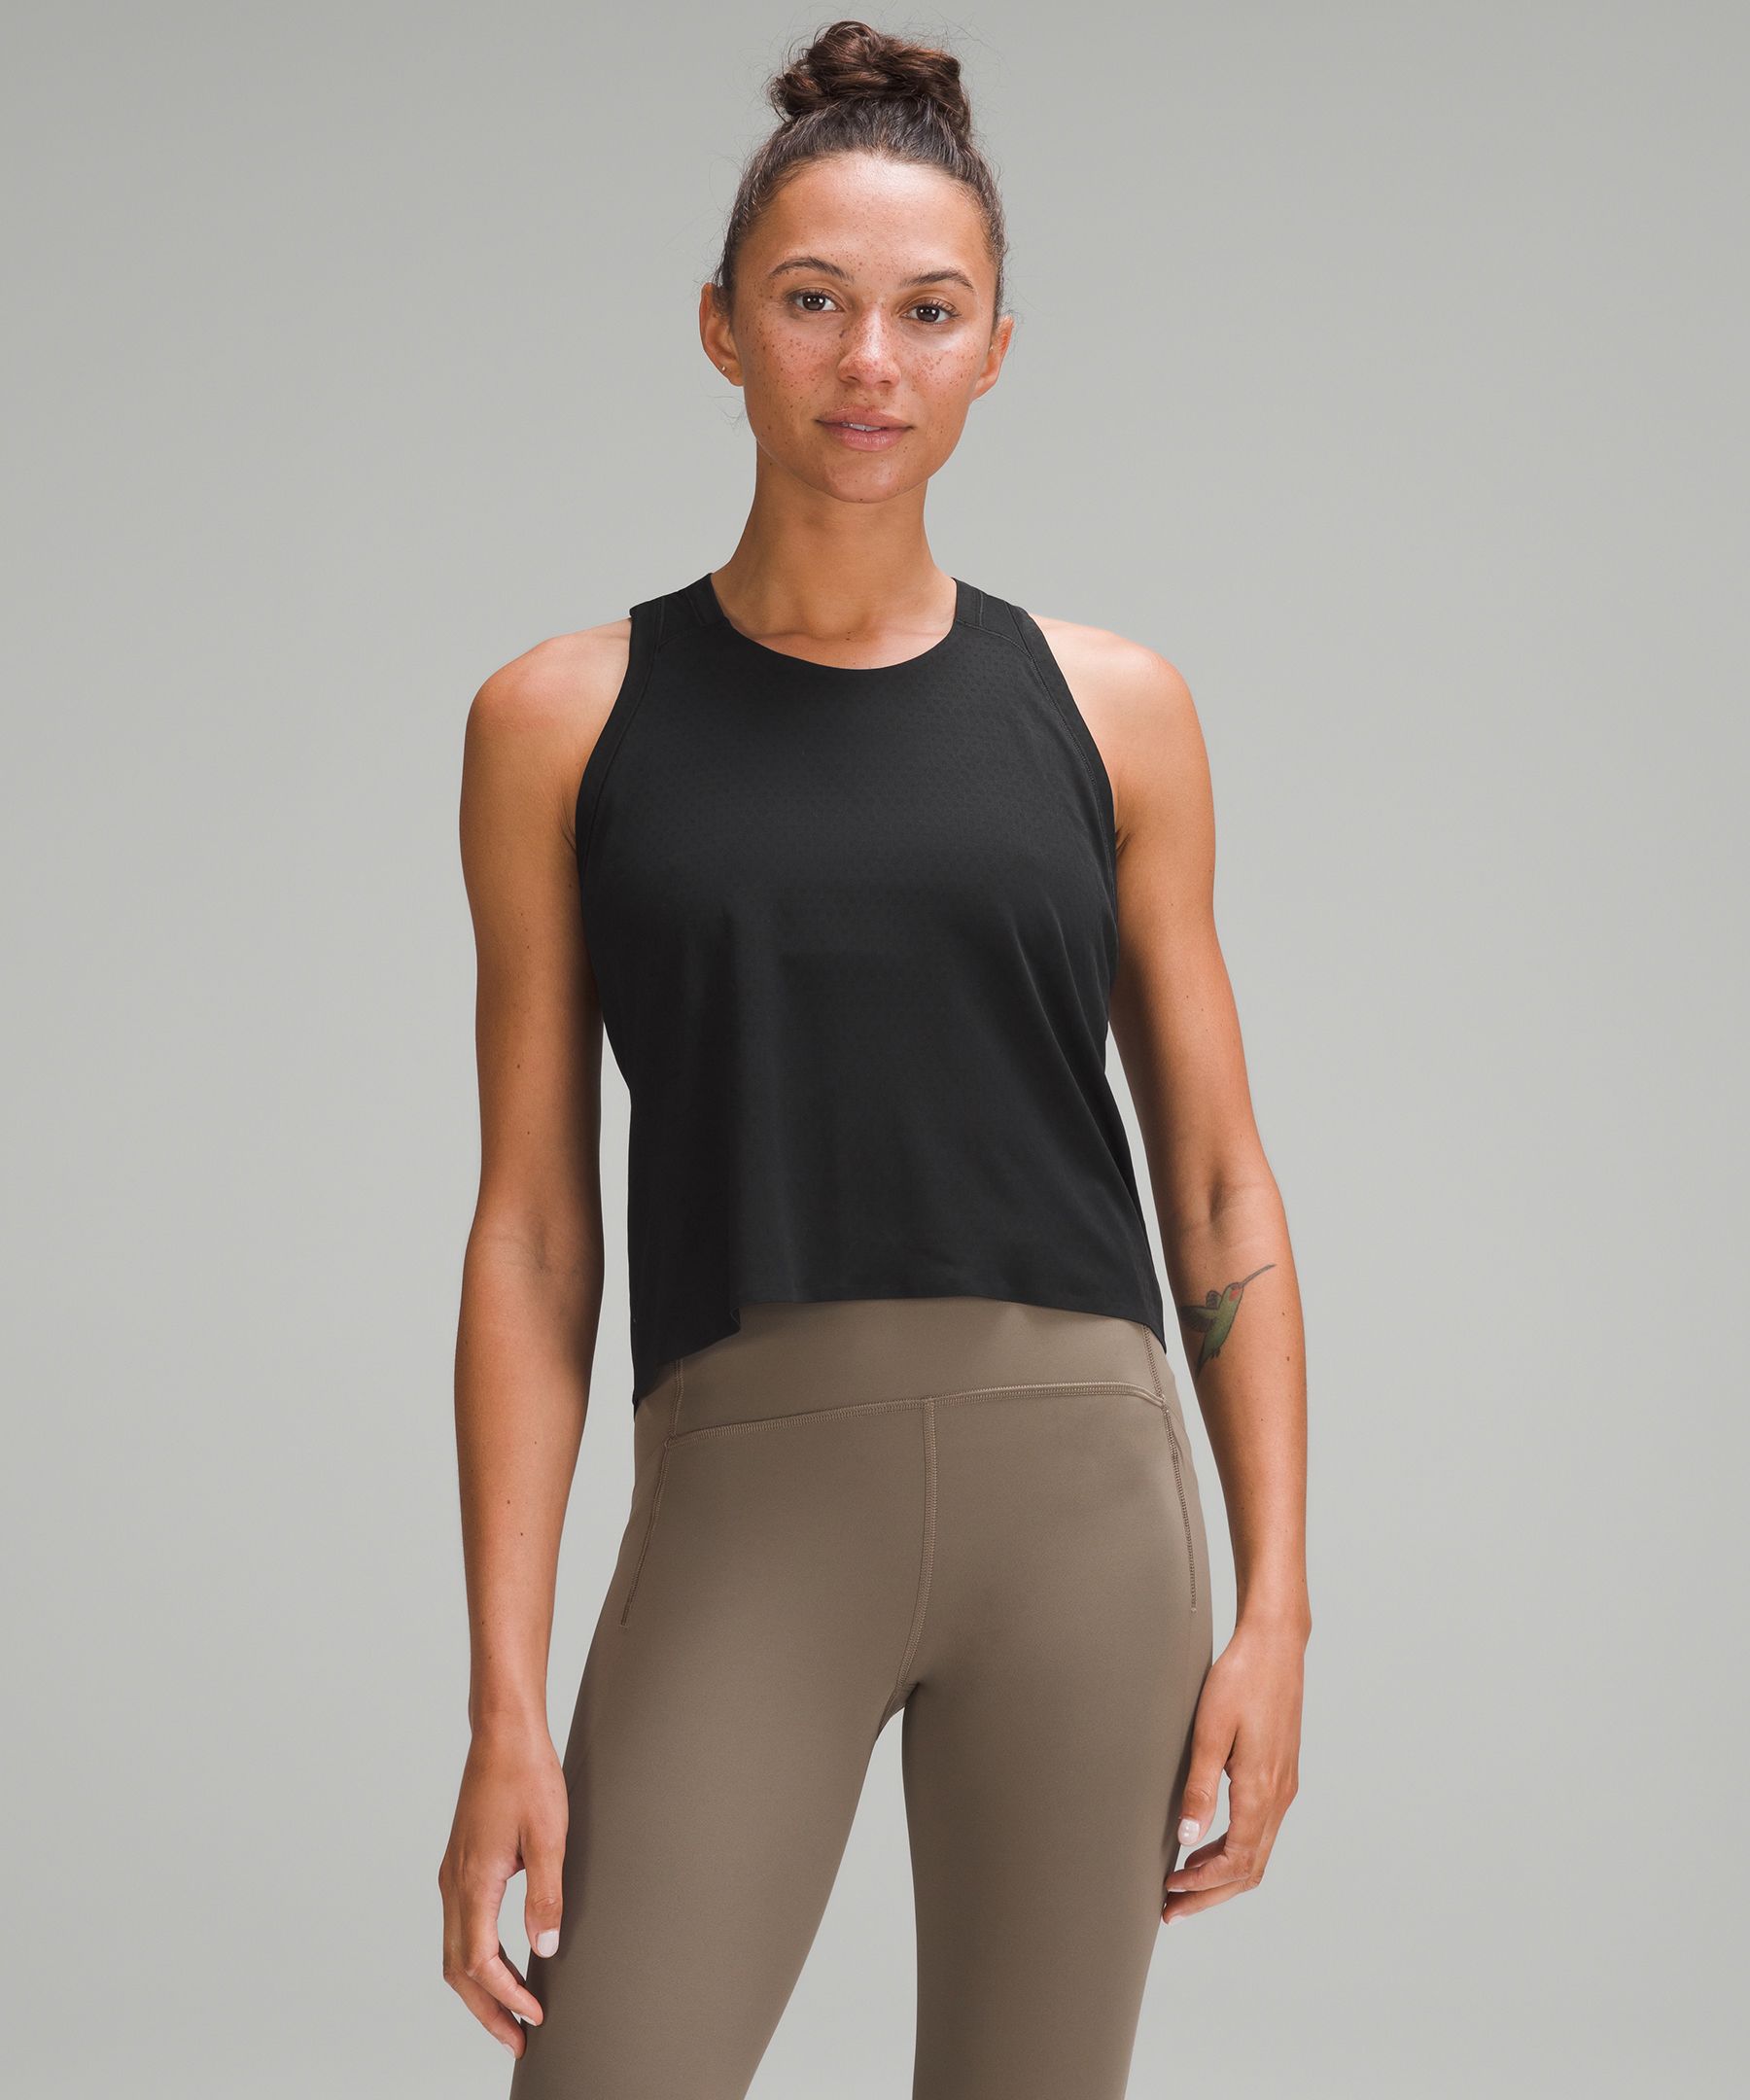 This $68 Lululemon workout tank top is 'perfect' for people with longer  torsos